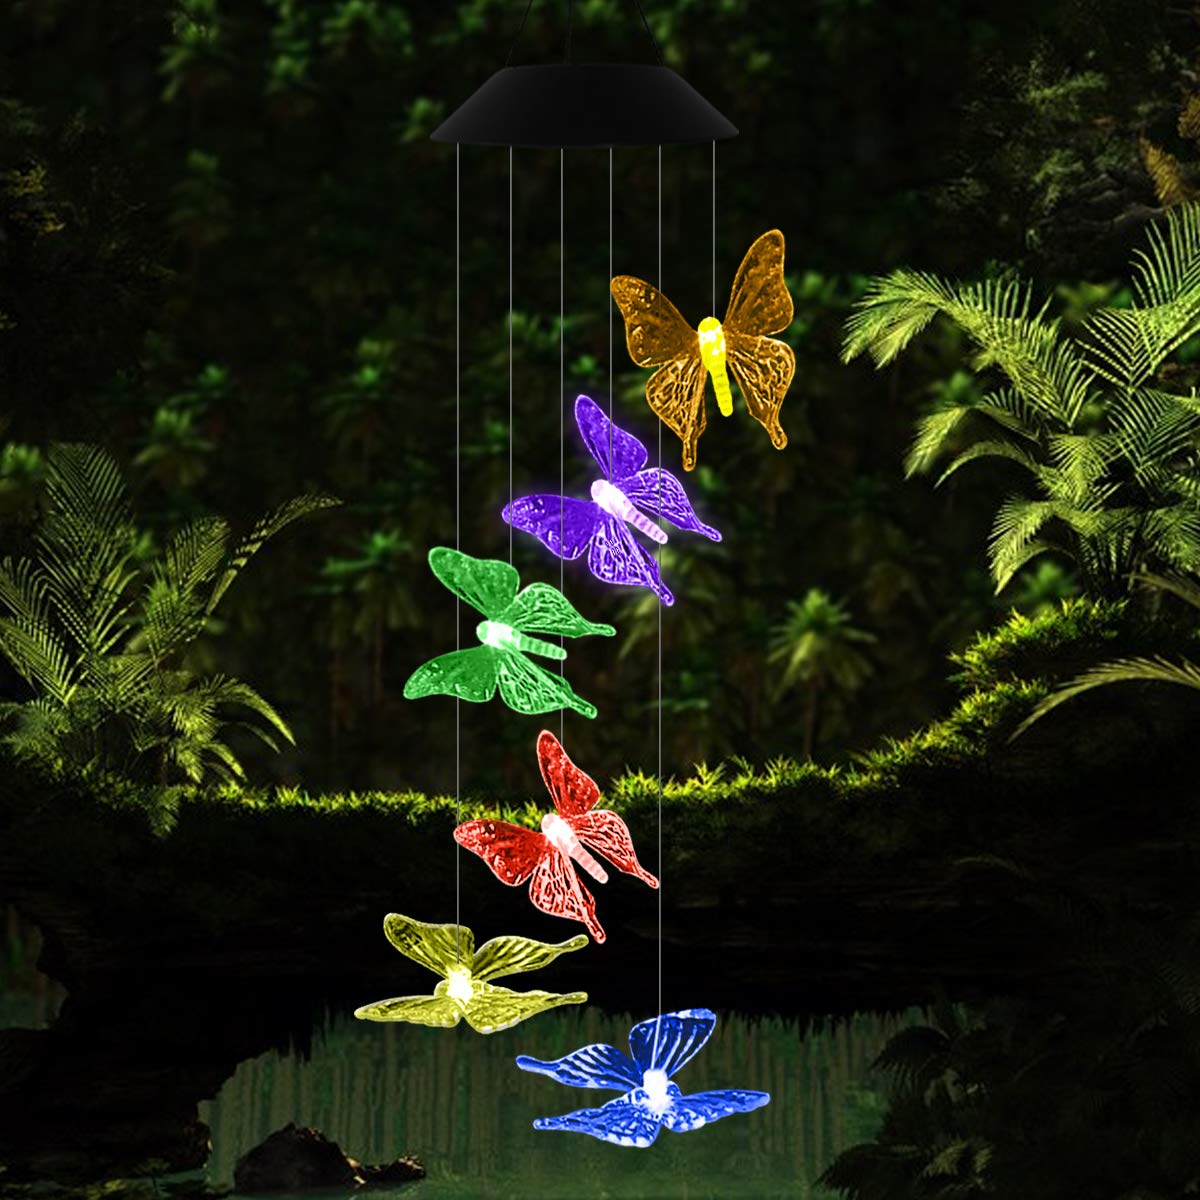 Solar Wind Chimes Outdoor, Waterproof Solar Butterfly Wind Chimes Color Changing LED Solar Powered Mobile Wind Chime, Hanging Decorative Romantic Patio Lights for Yard Garden Home Party - image 3 of 8